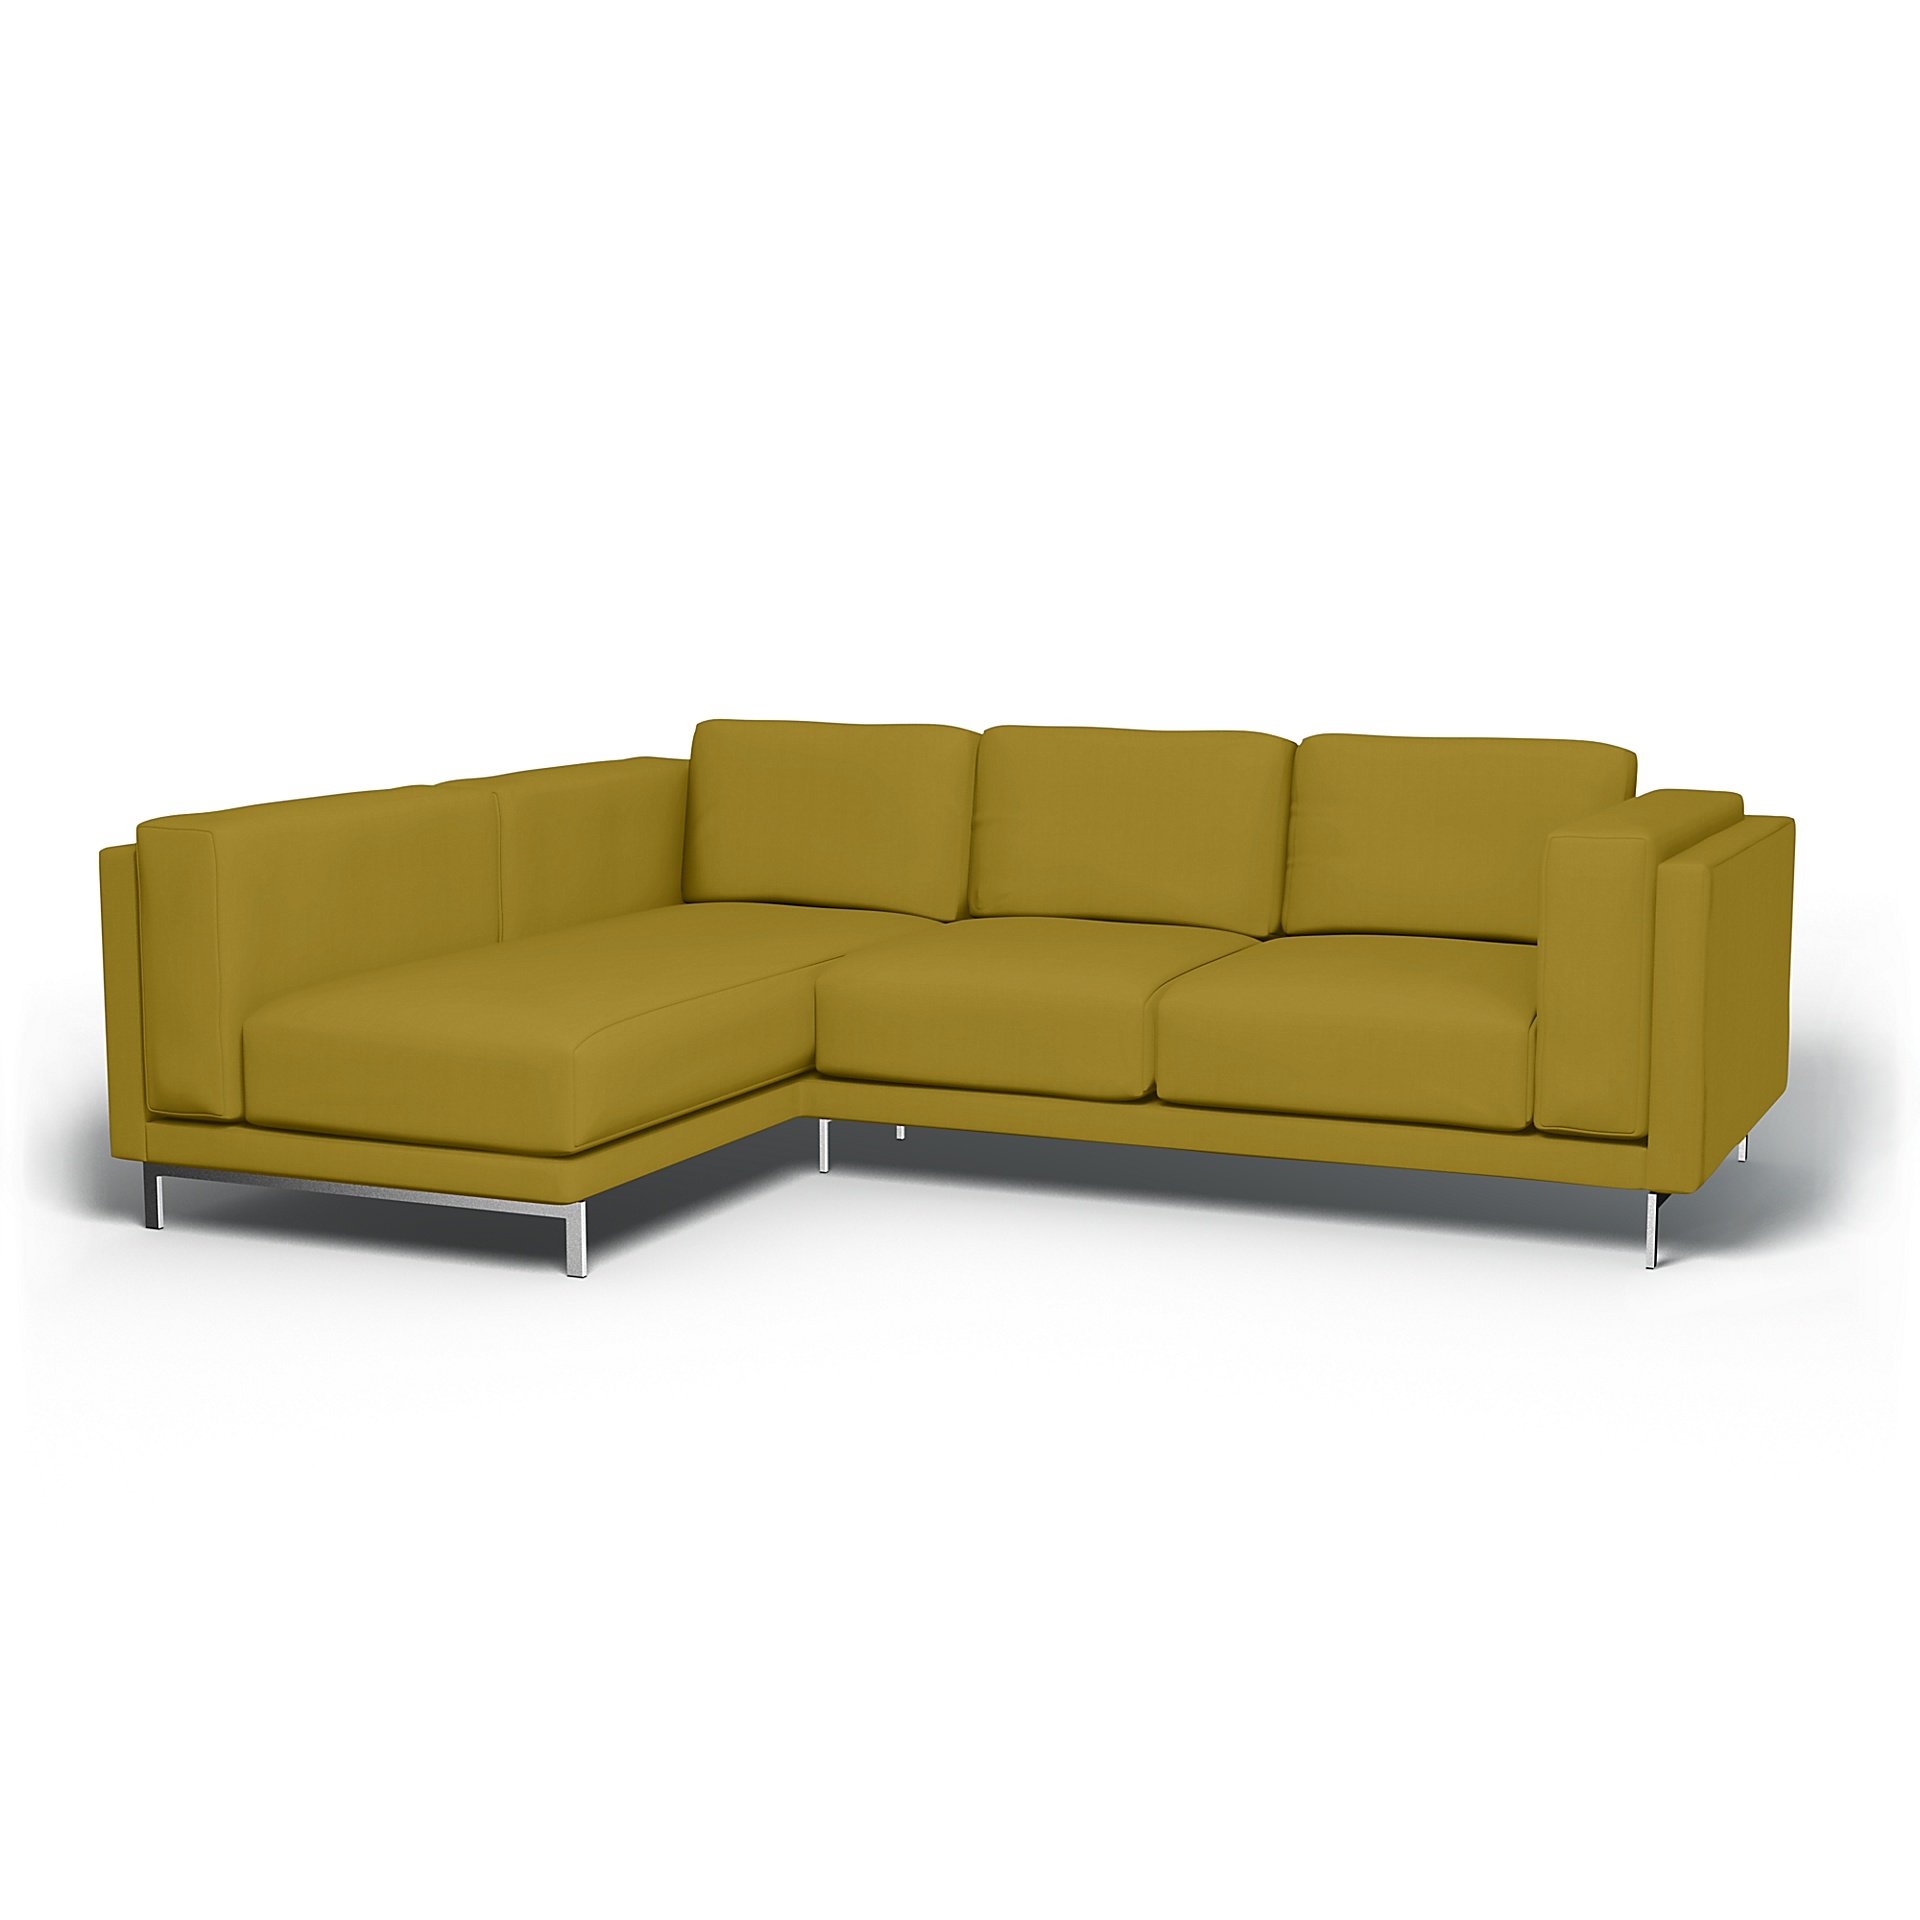 IKEA - Nockeby 3 Seater Sofa with Left Chaise Cover, Olive Oil, Cotton - Bemz